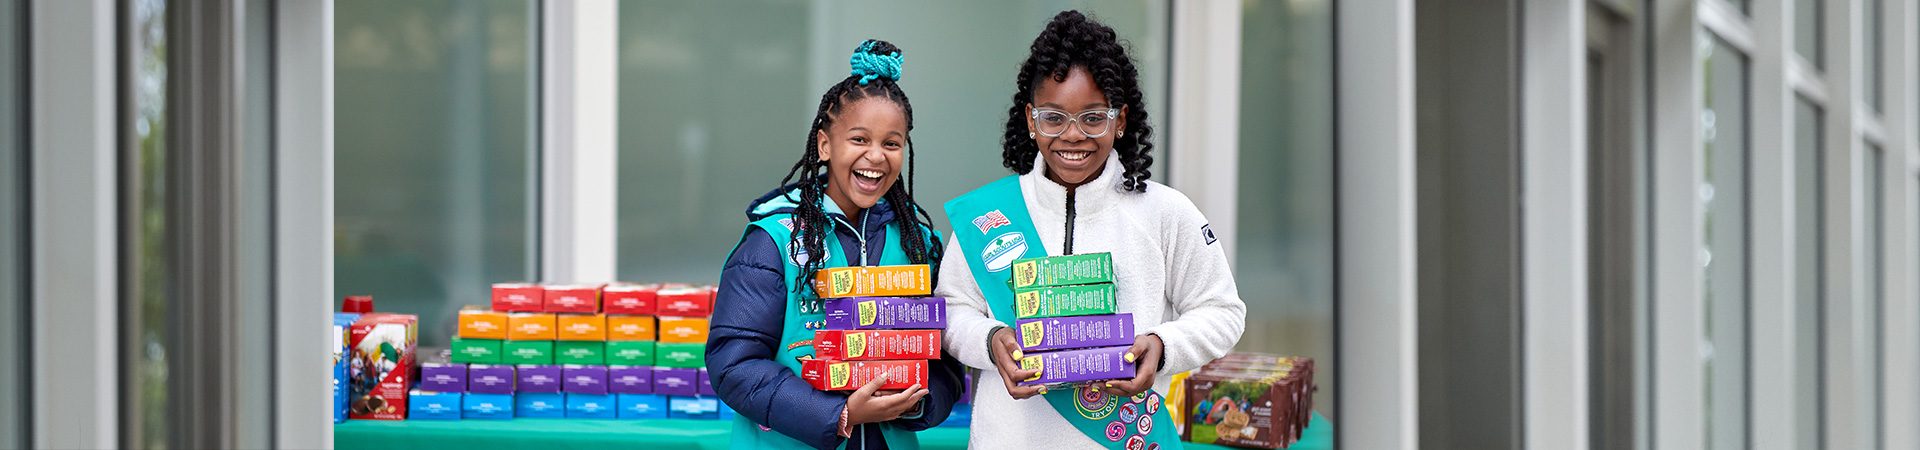  hands of young girl scout holding cookie boxes next to cookie transporter 